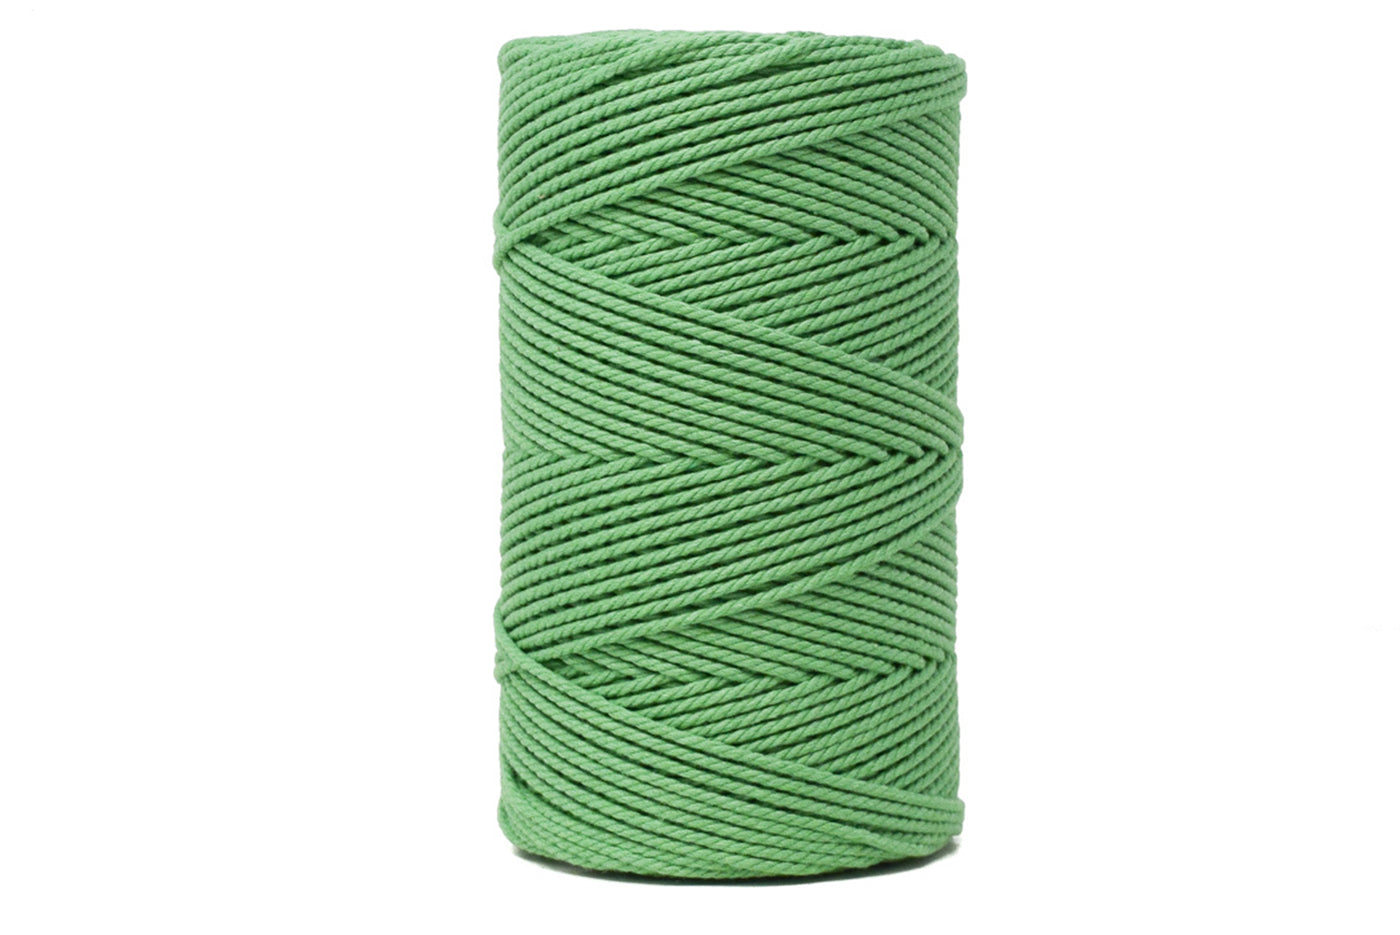 COTTON ROPE ZERO WASTE 2 MM - 3 PLY - GRASS COLOR